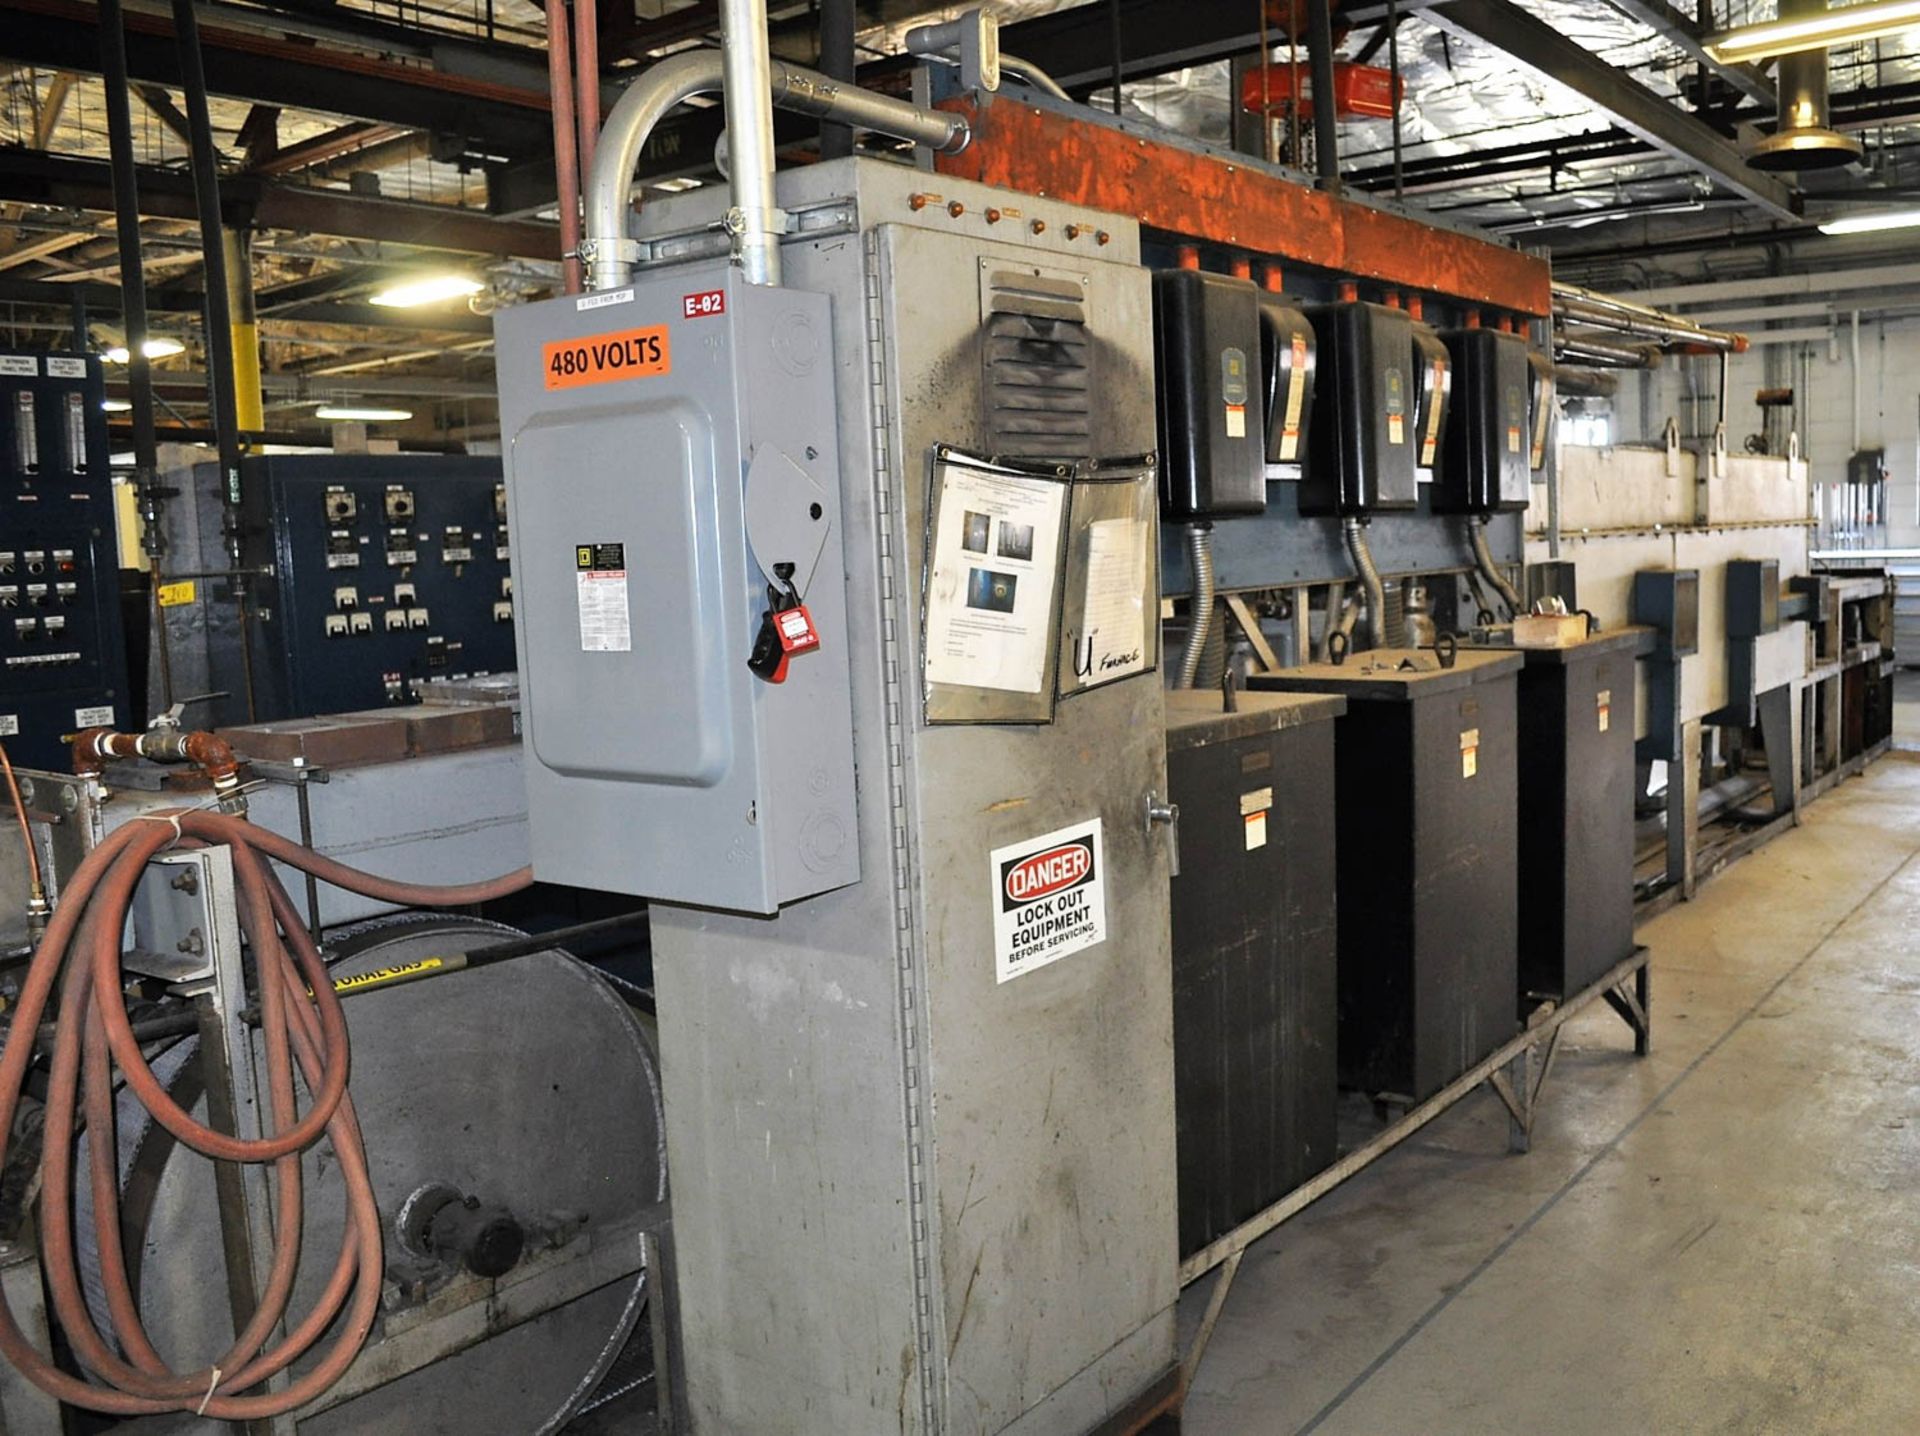 7" LINDBERG PASS THRU BELT FURNACE, 3-ZONE, WITH DIGITAL TEMPERATURE CONTROLS, S/N: N/A - Image 8 of 9